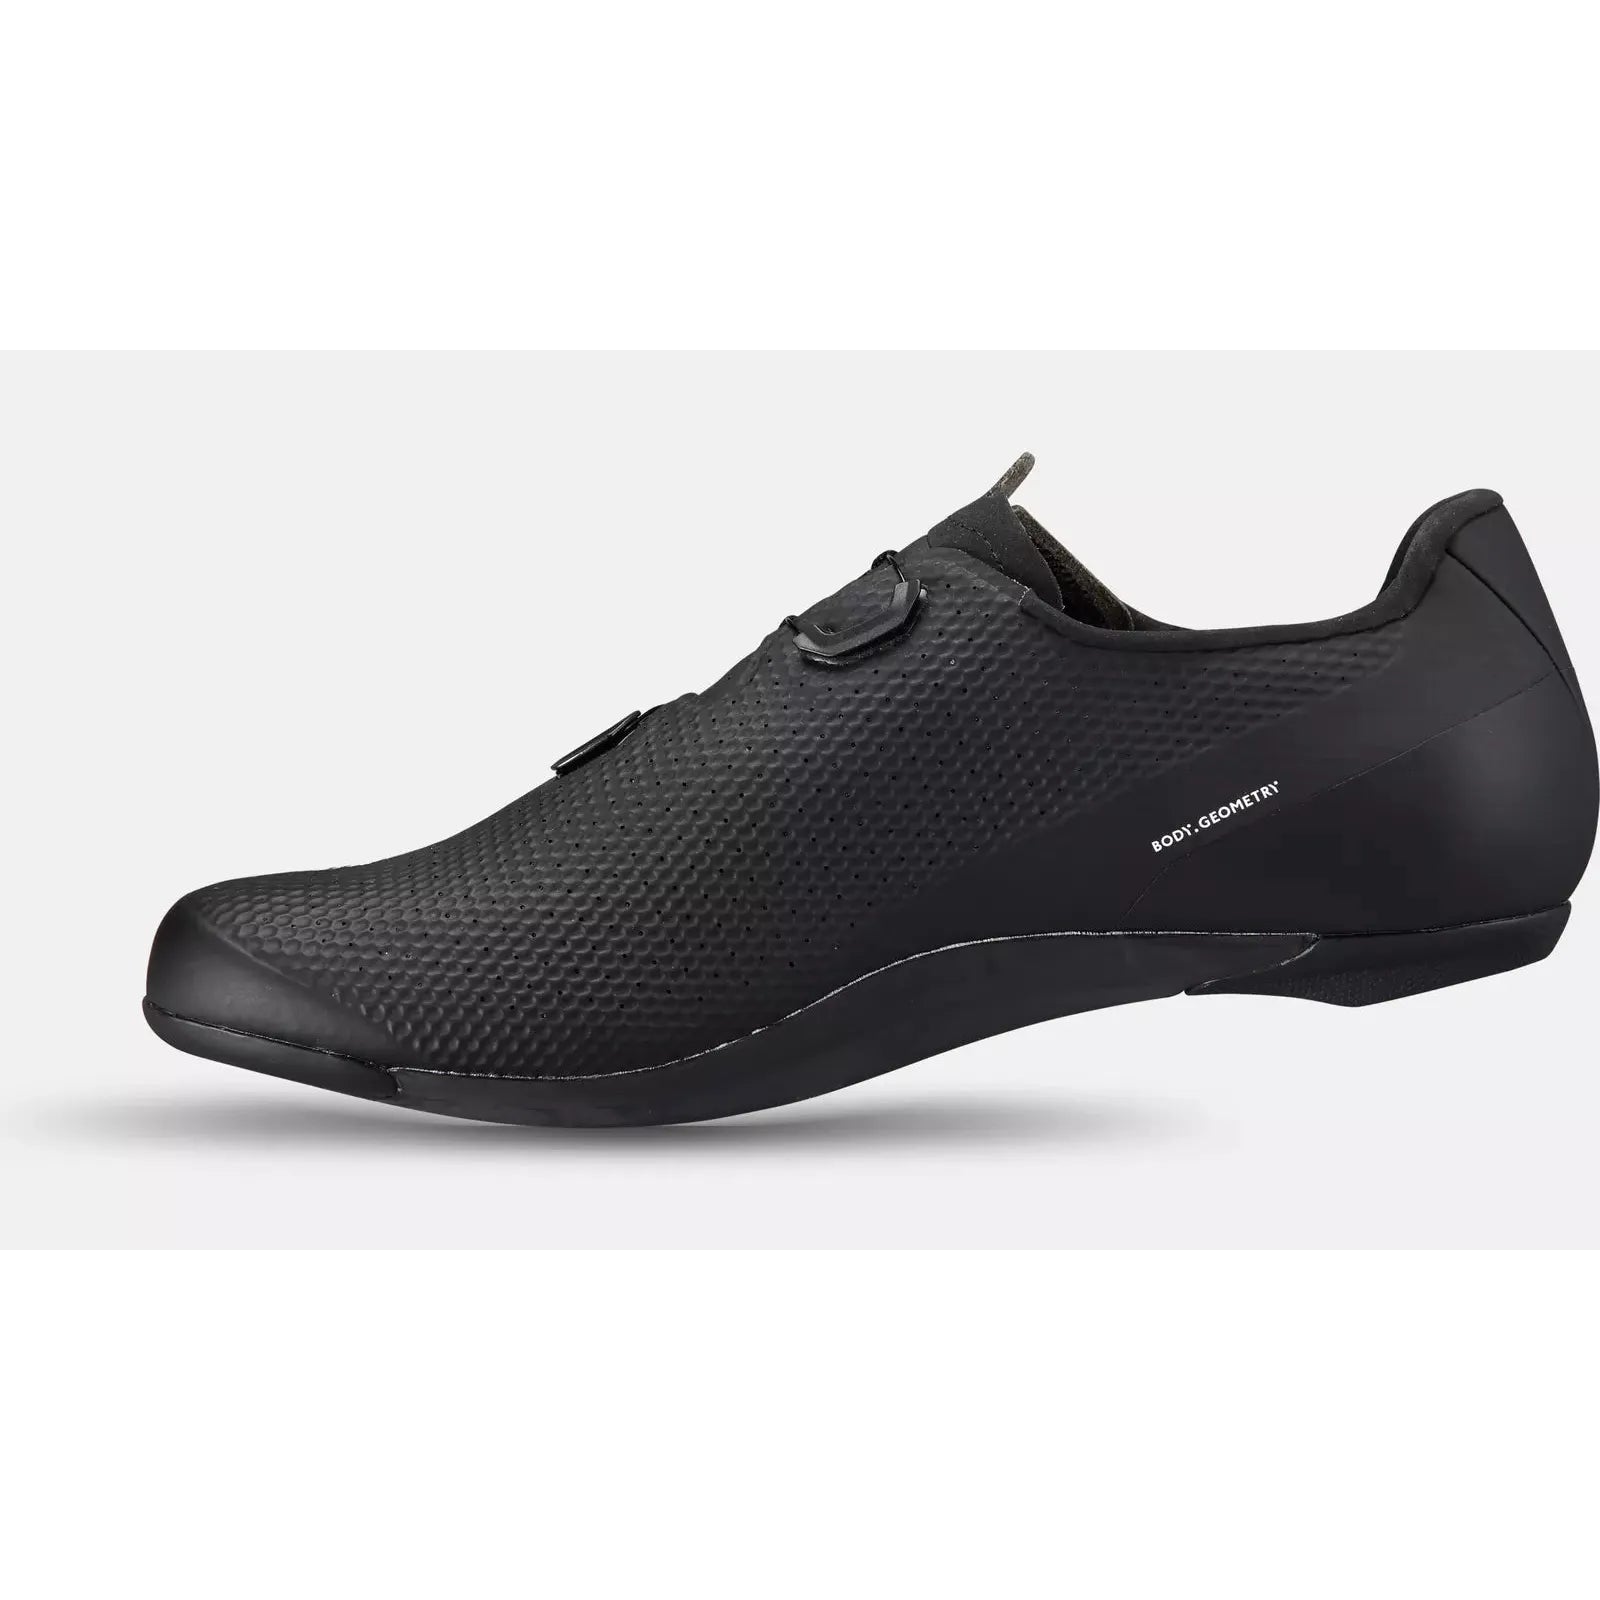 Specialized Torch 3.0 Road Shoe Black 24